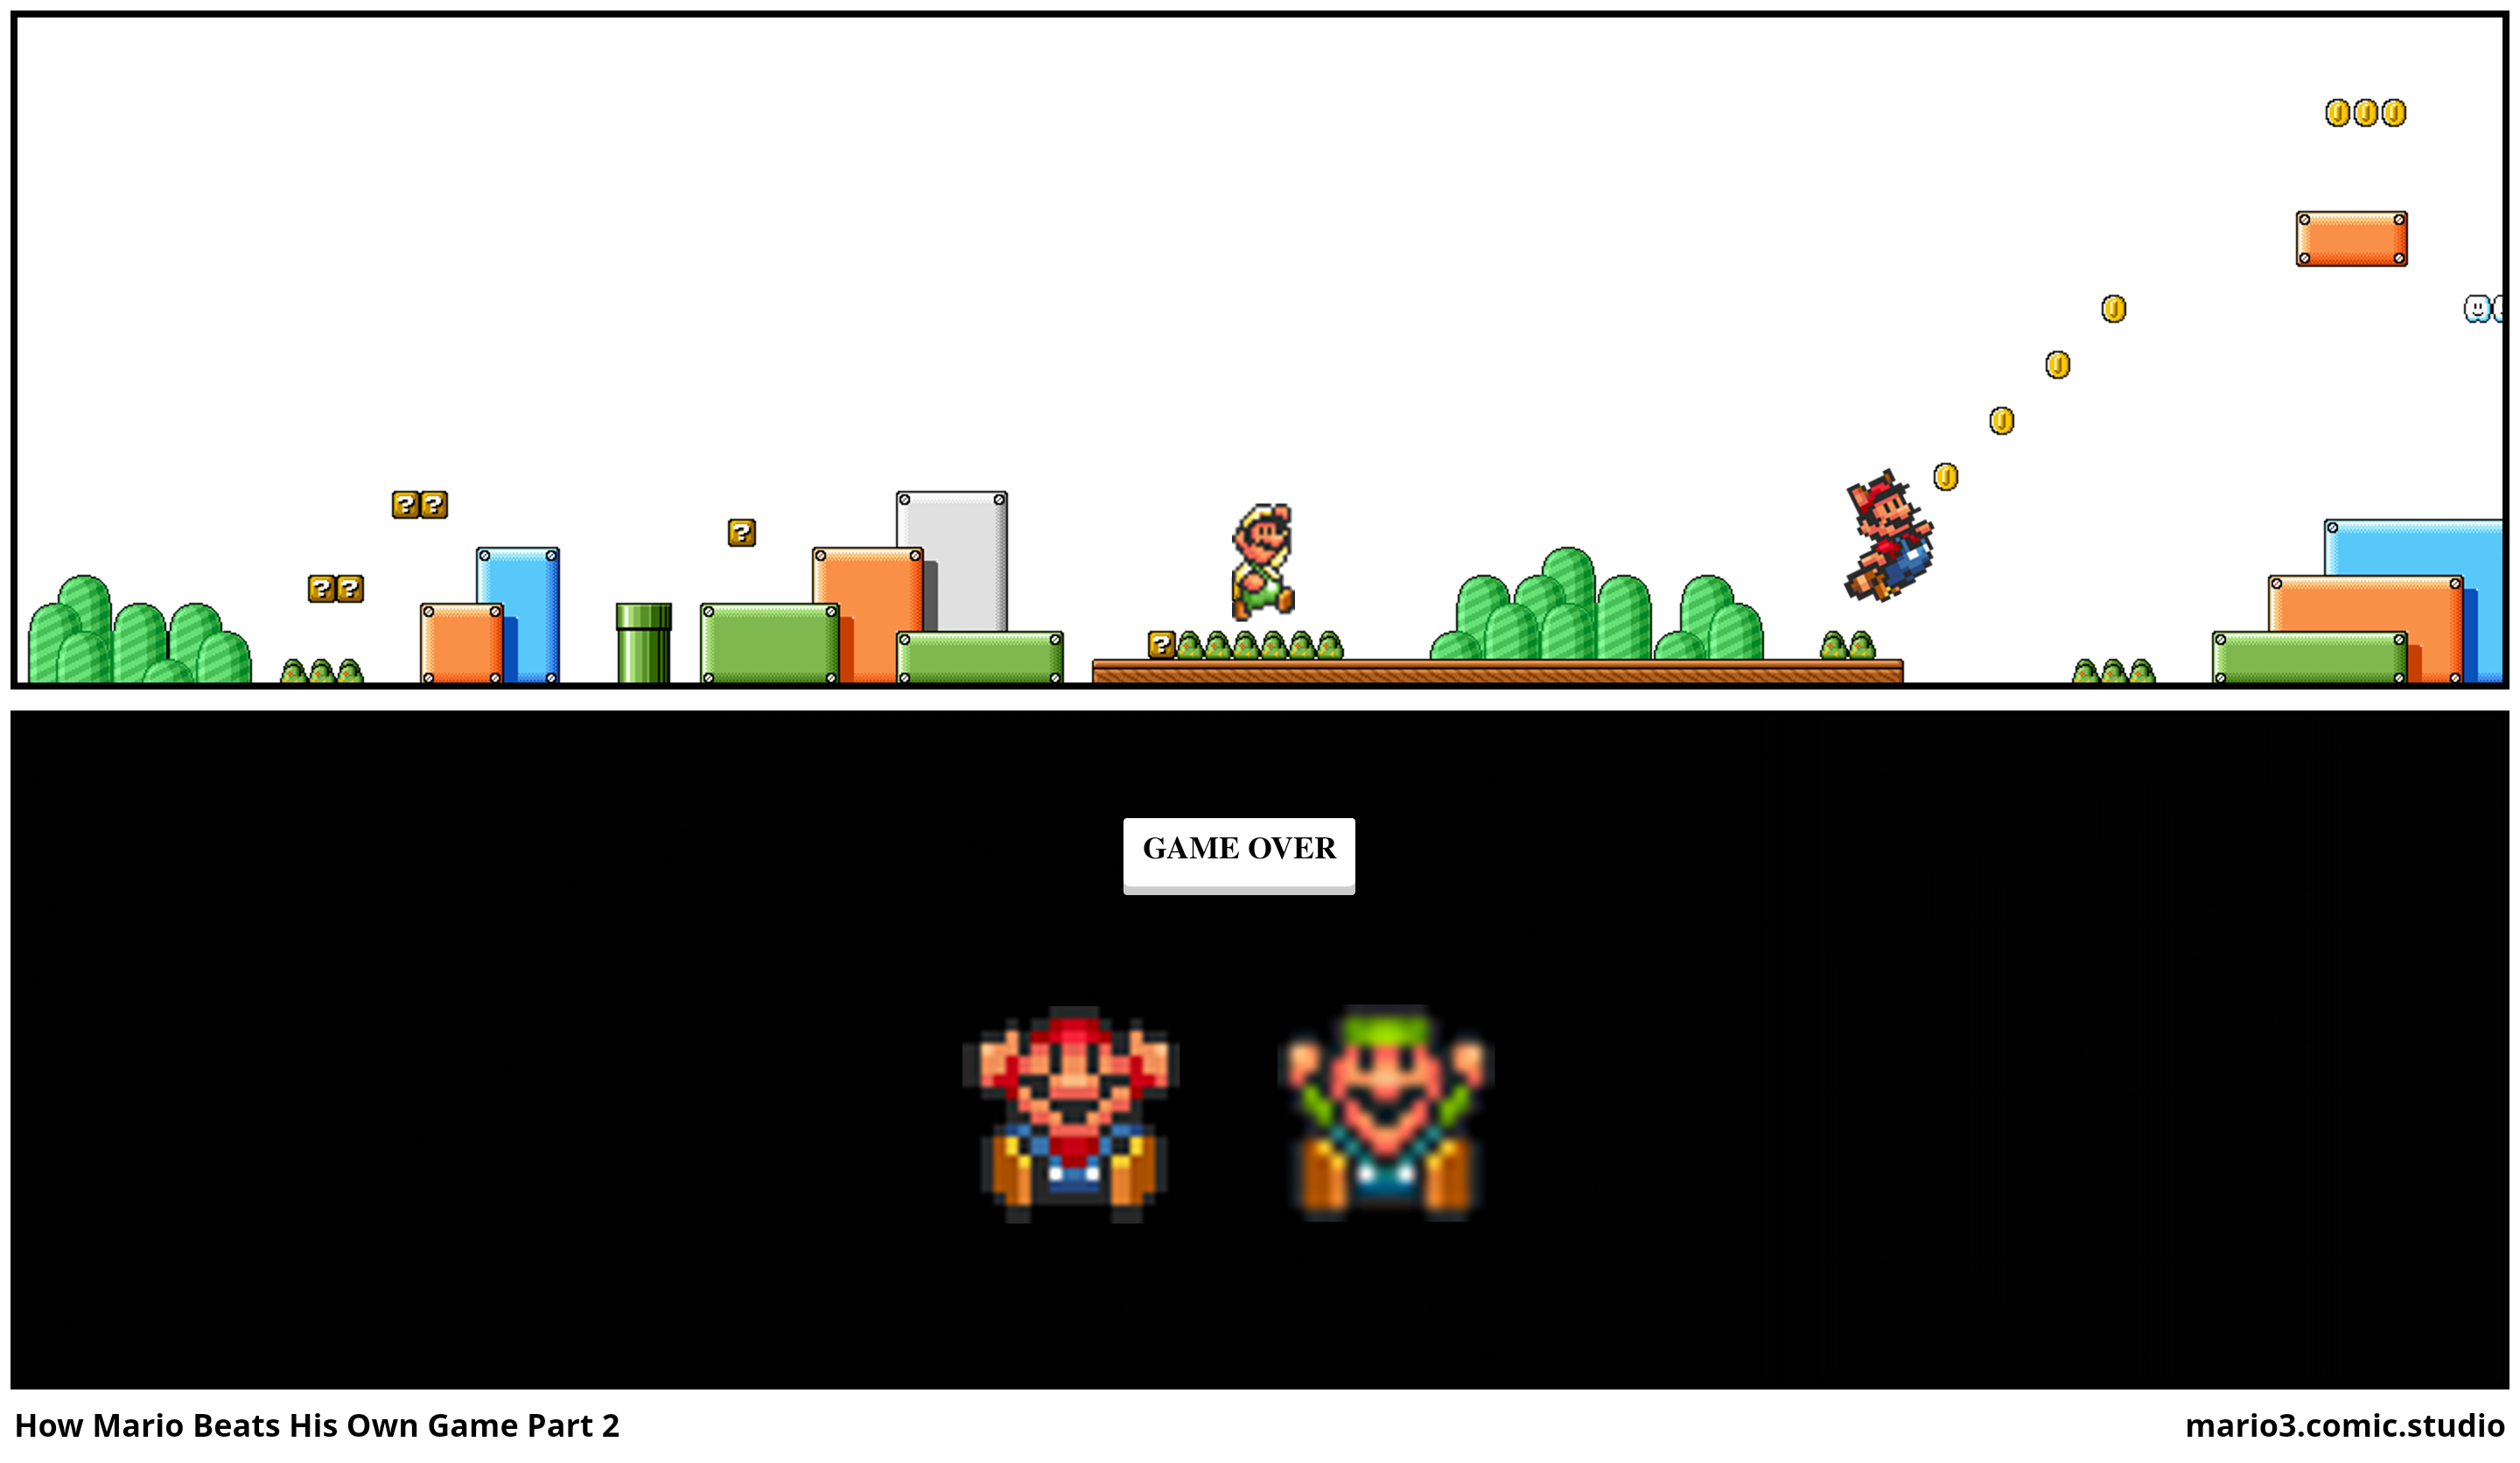 How Mario Beats His Own Game Part 2